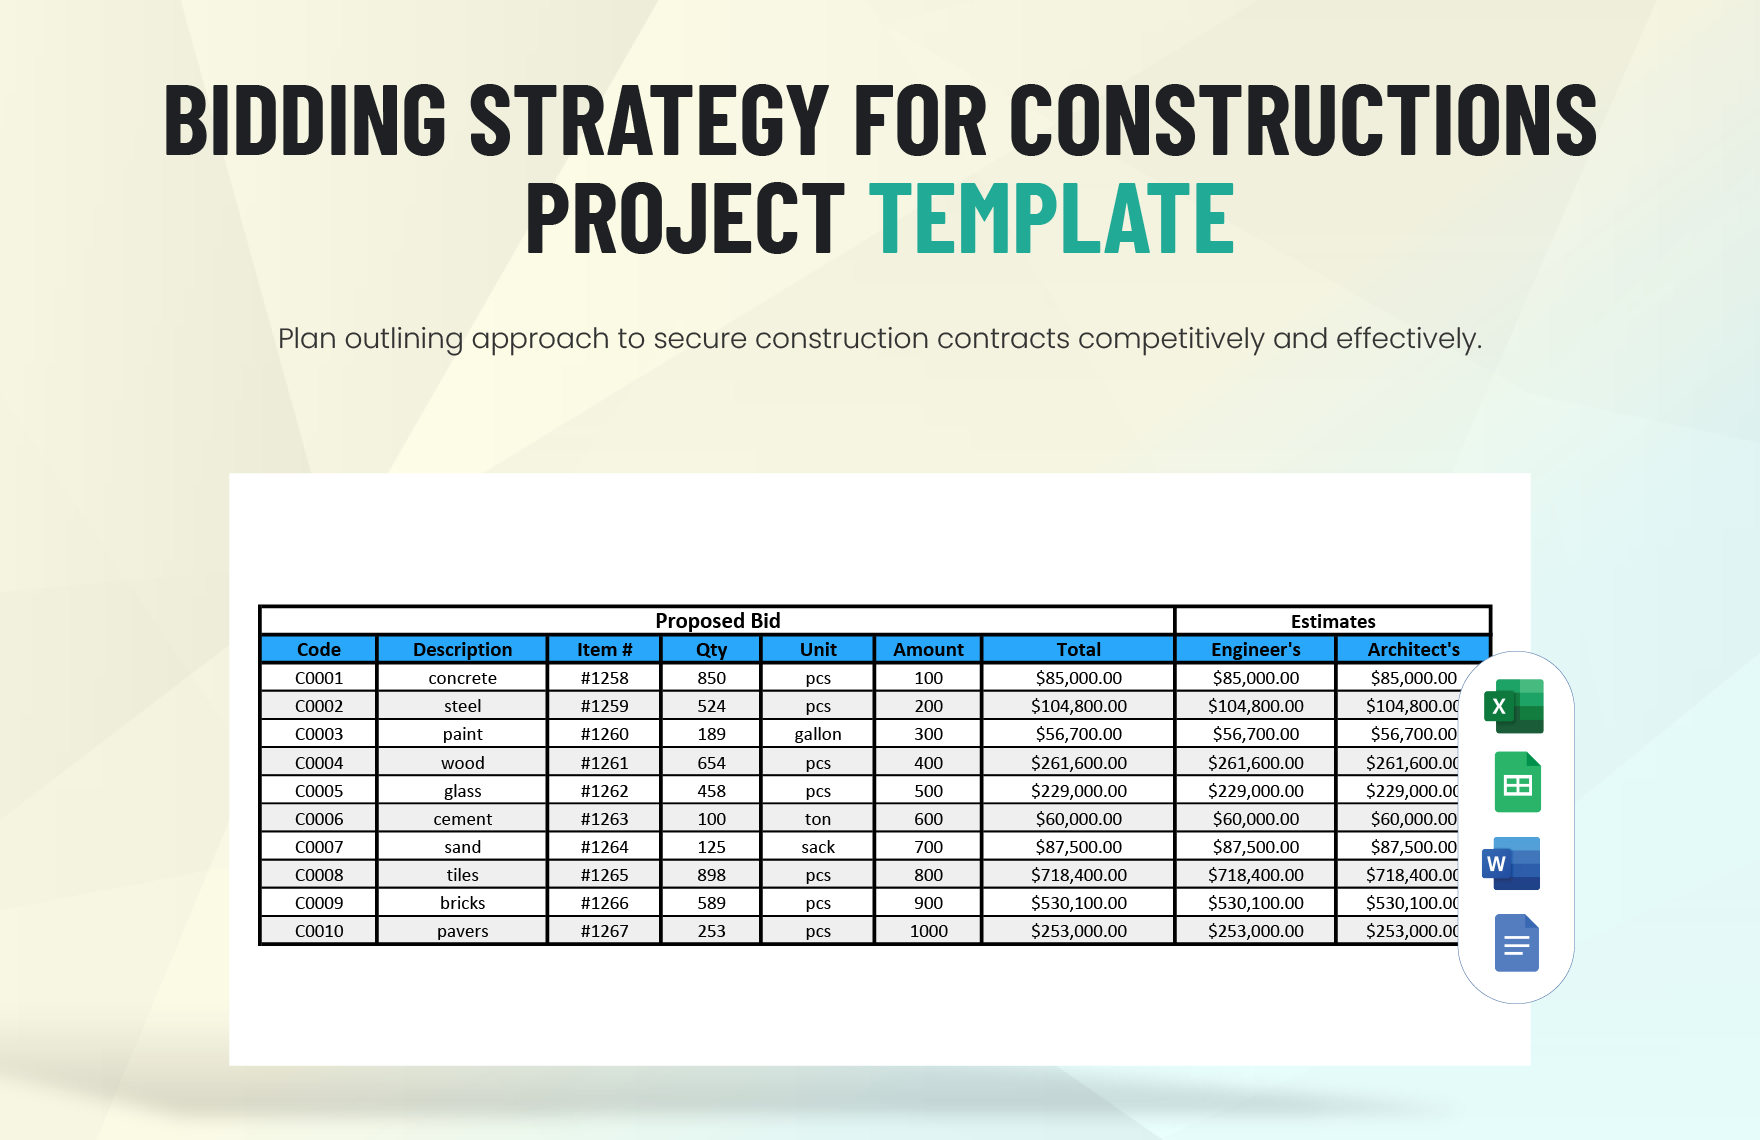 Bidding Strategy for Construction Projects Template in Word, Excel, Apple Pages, Apple Numbers